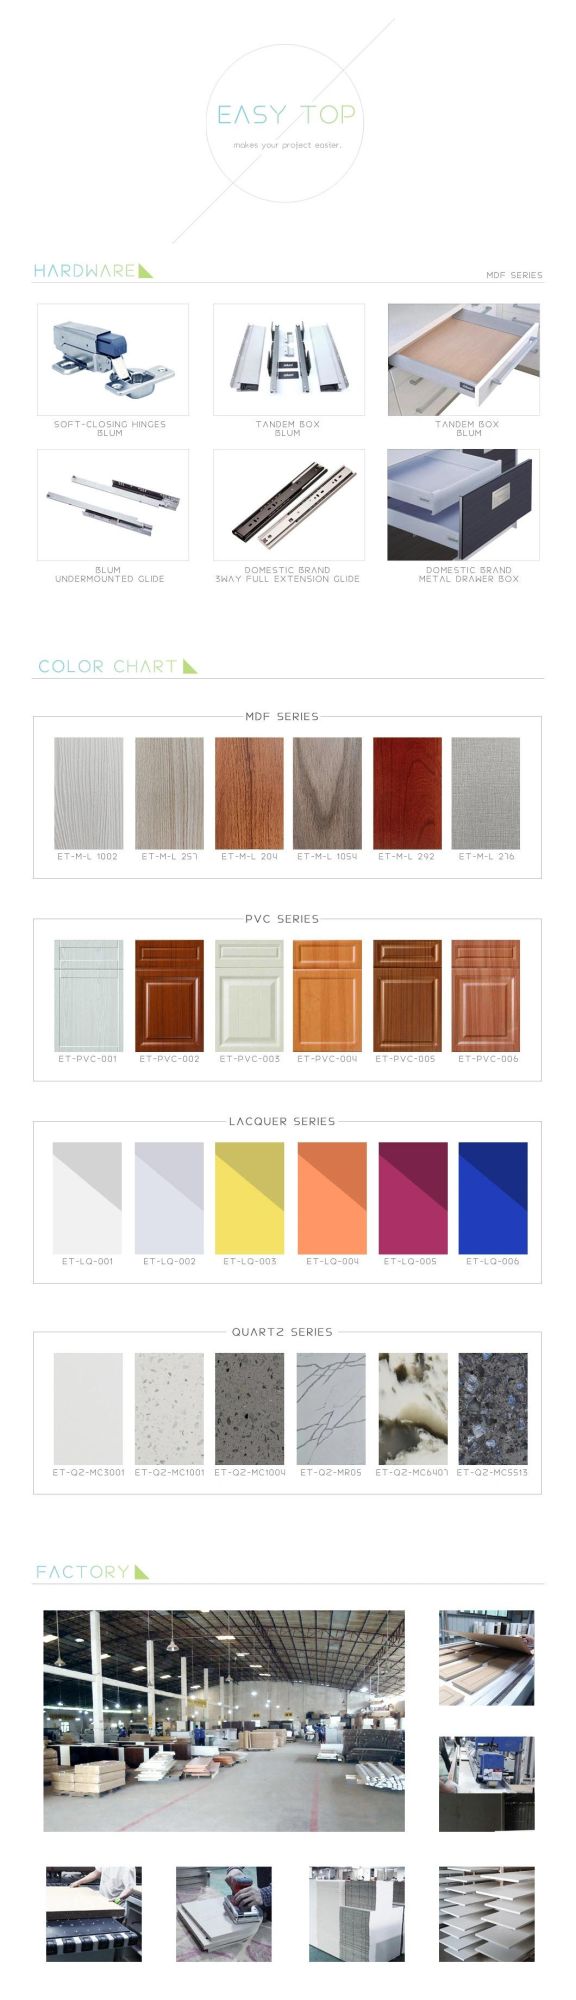 Custom Color and Handle Cheap Price Particle Board/MDF/Plywood Material Melamine Finish Kitchen Set Cabinet